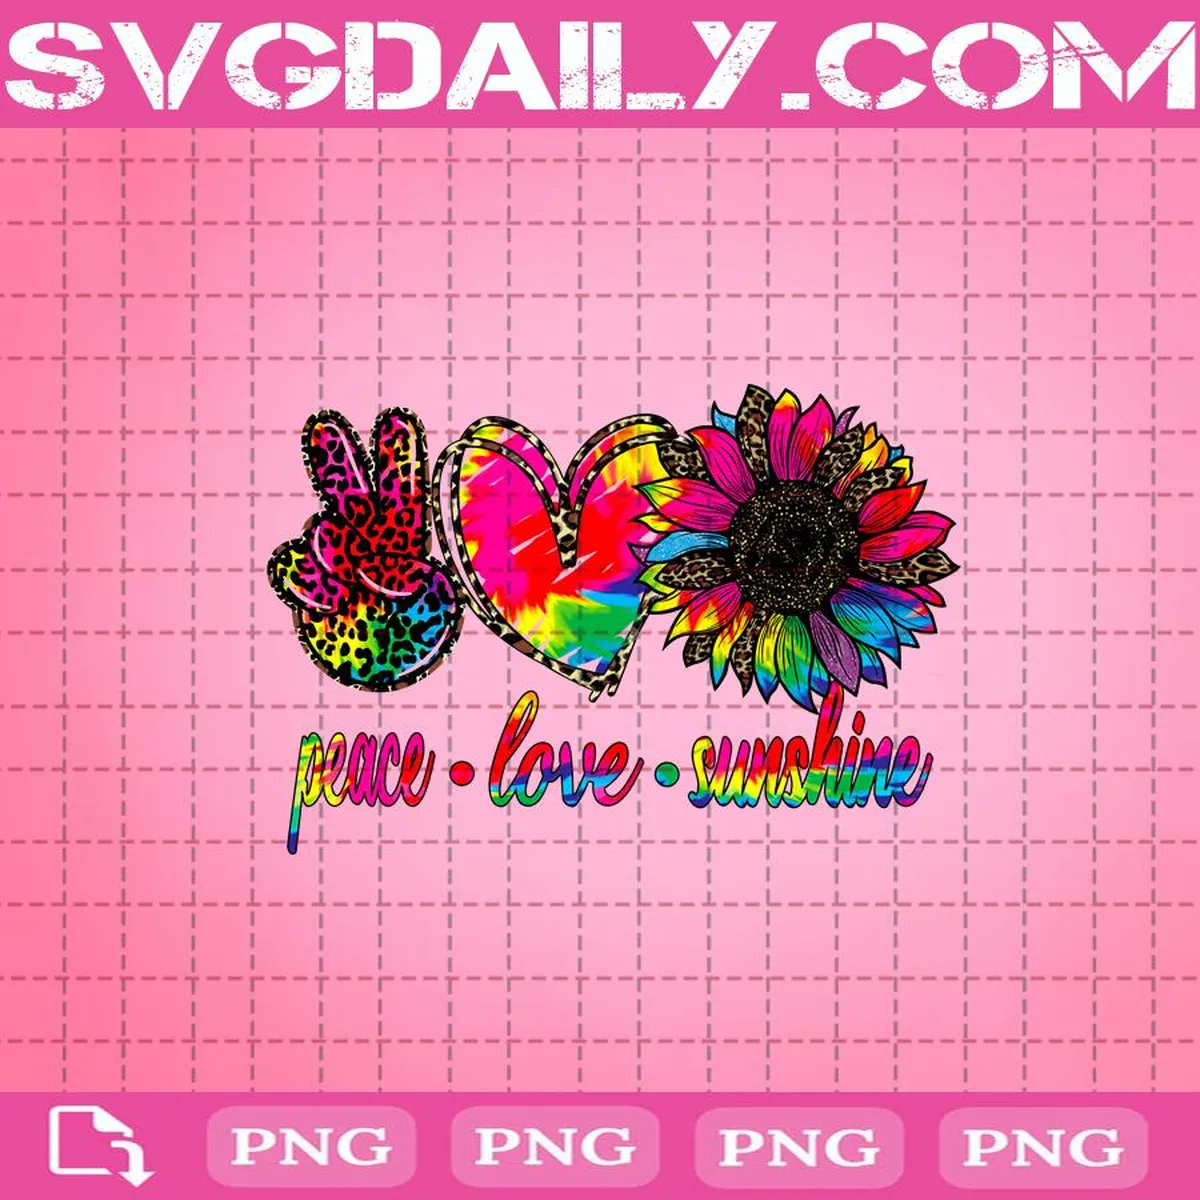 Peace Love Sunshine Png, Peace Love Png, Sunshine Png, Tie Dye Leopard Sunflower Png, Colorful Sunflower Png